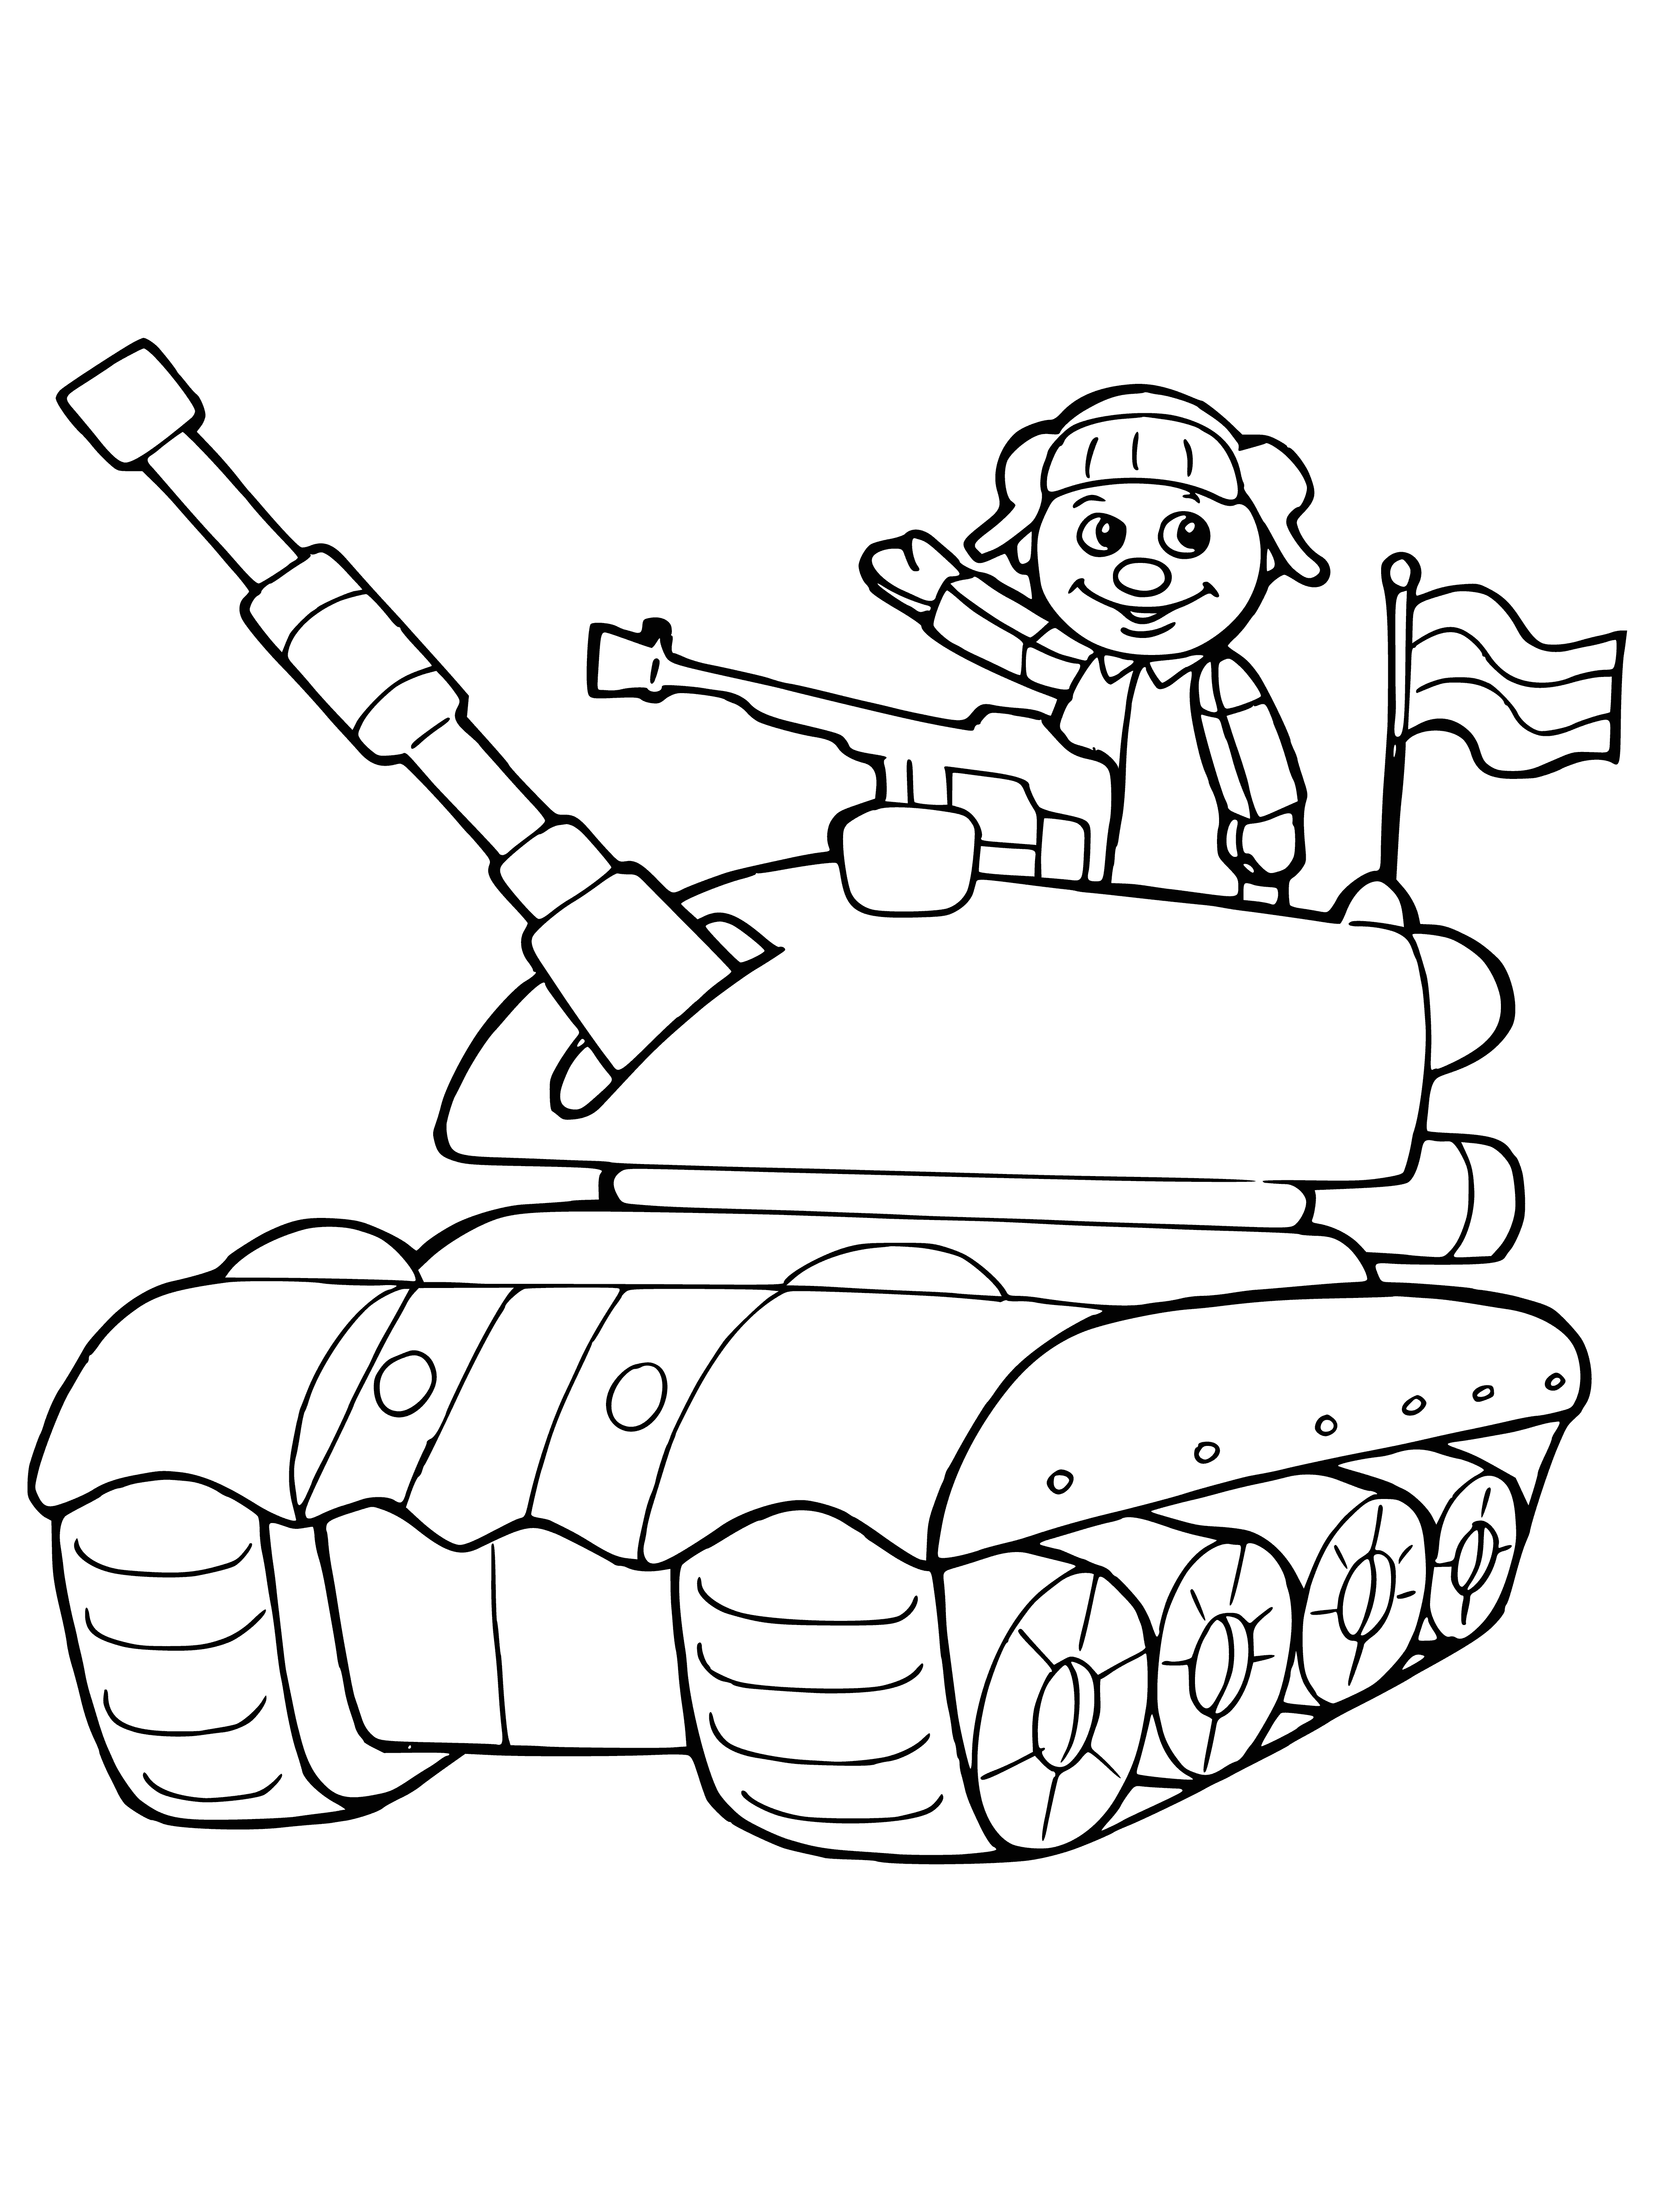 Toy tank coloring page